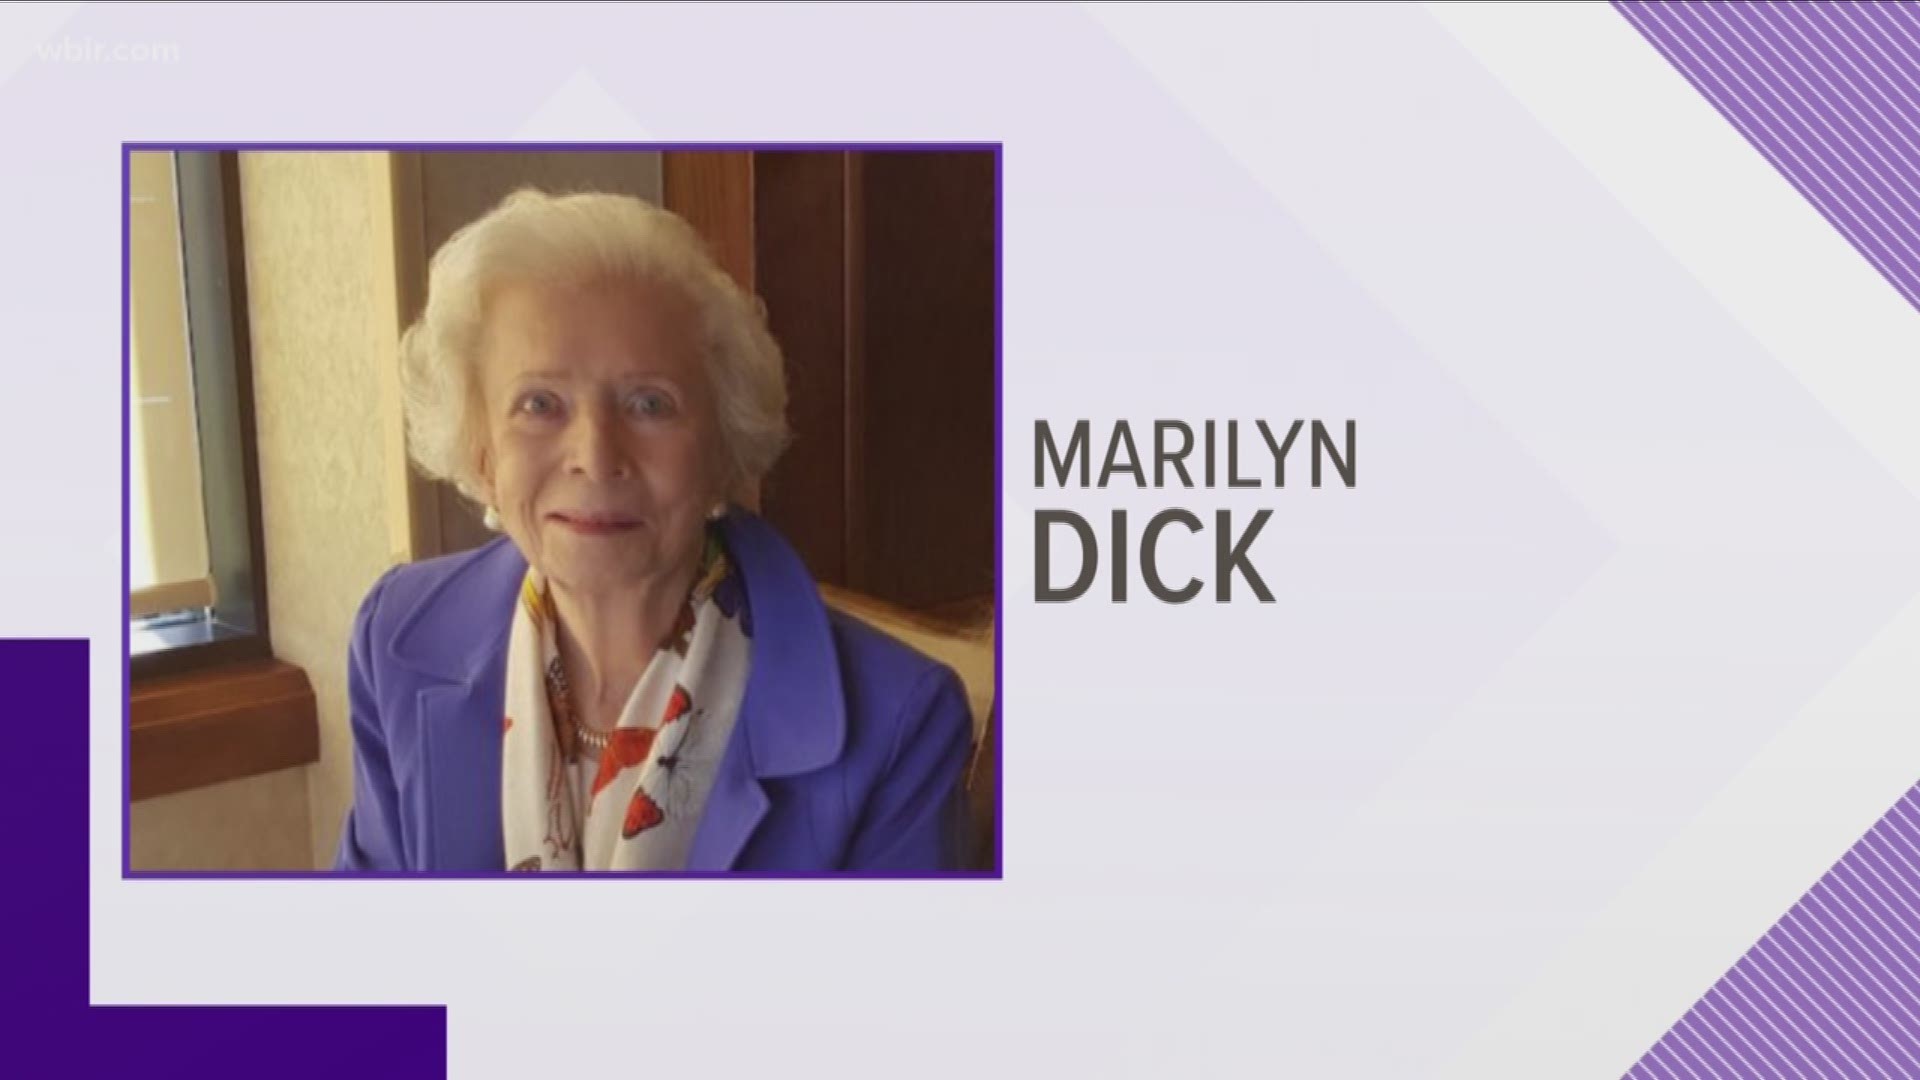 A longtime Knoxville philanthropist has died. Marilyn Dick passed away February 8th.